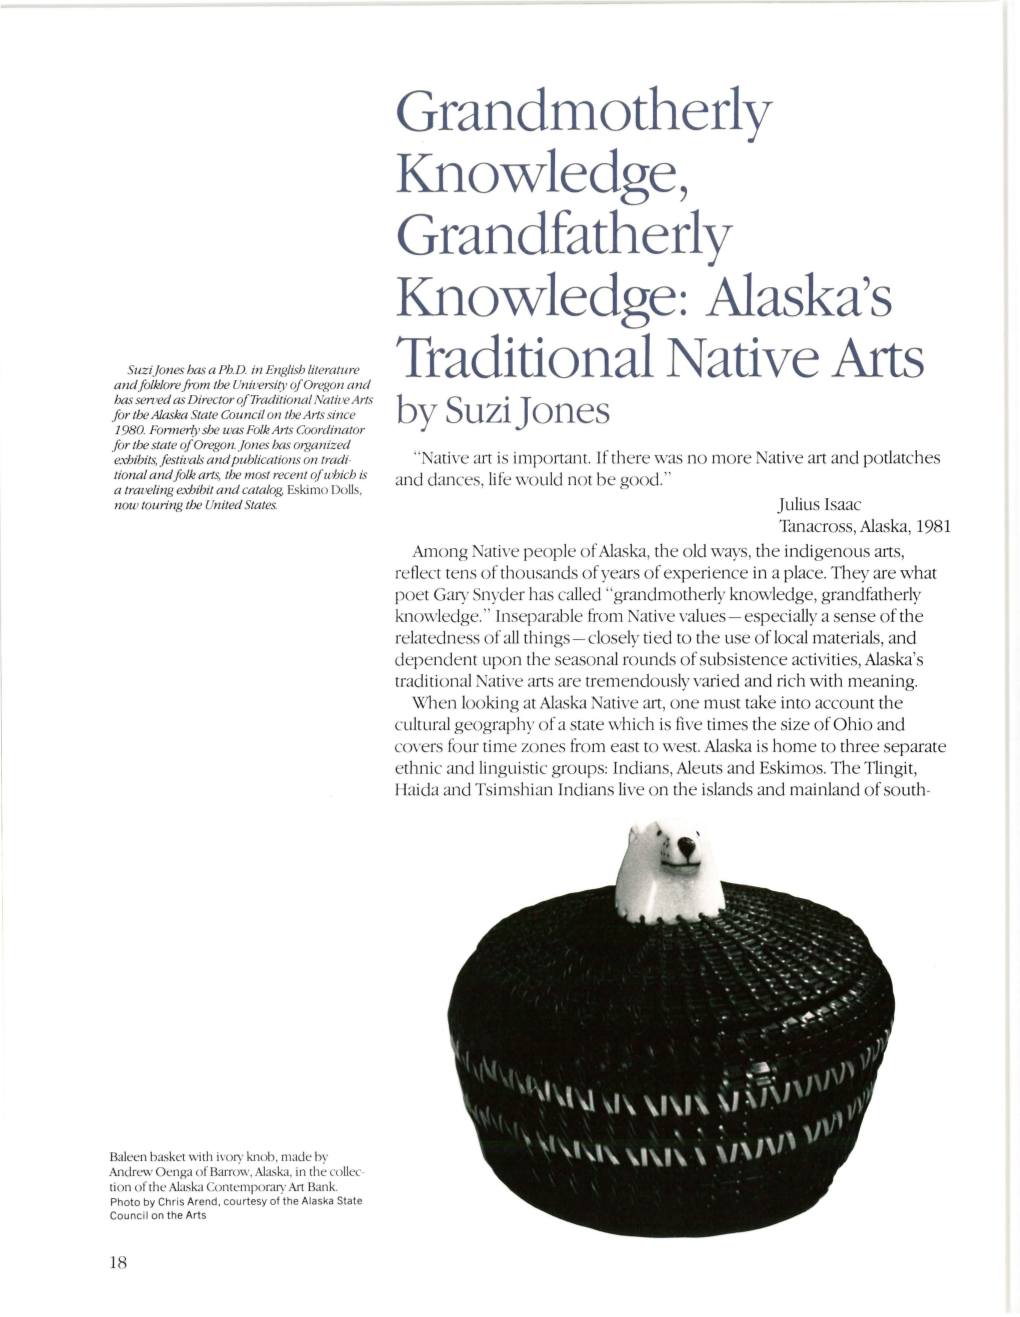 Alaska's Traditional Native Arts Are Tremendously Varied and Rich with Meaning